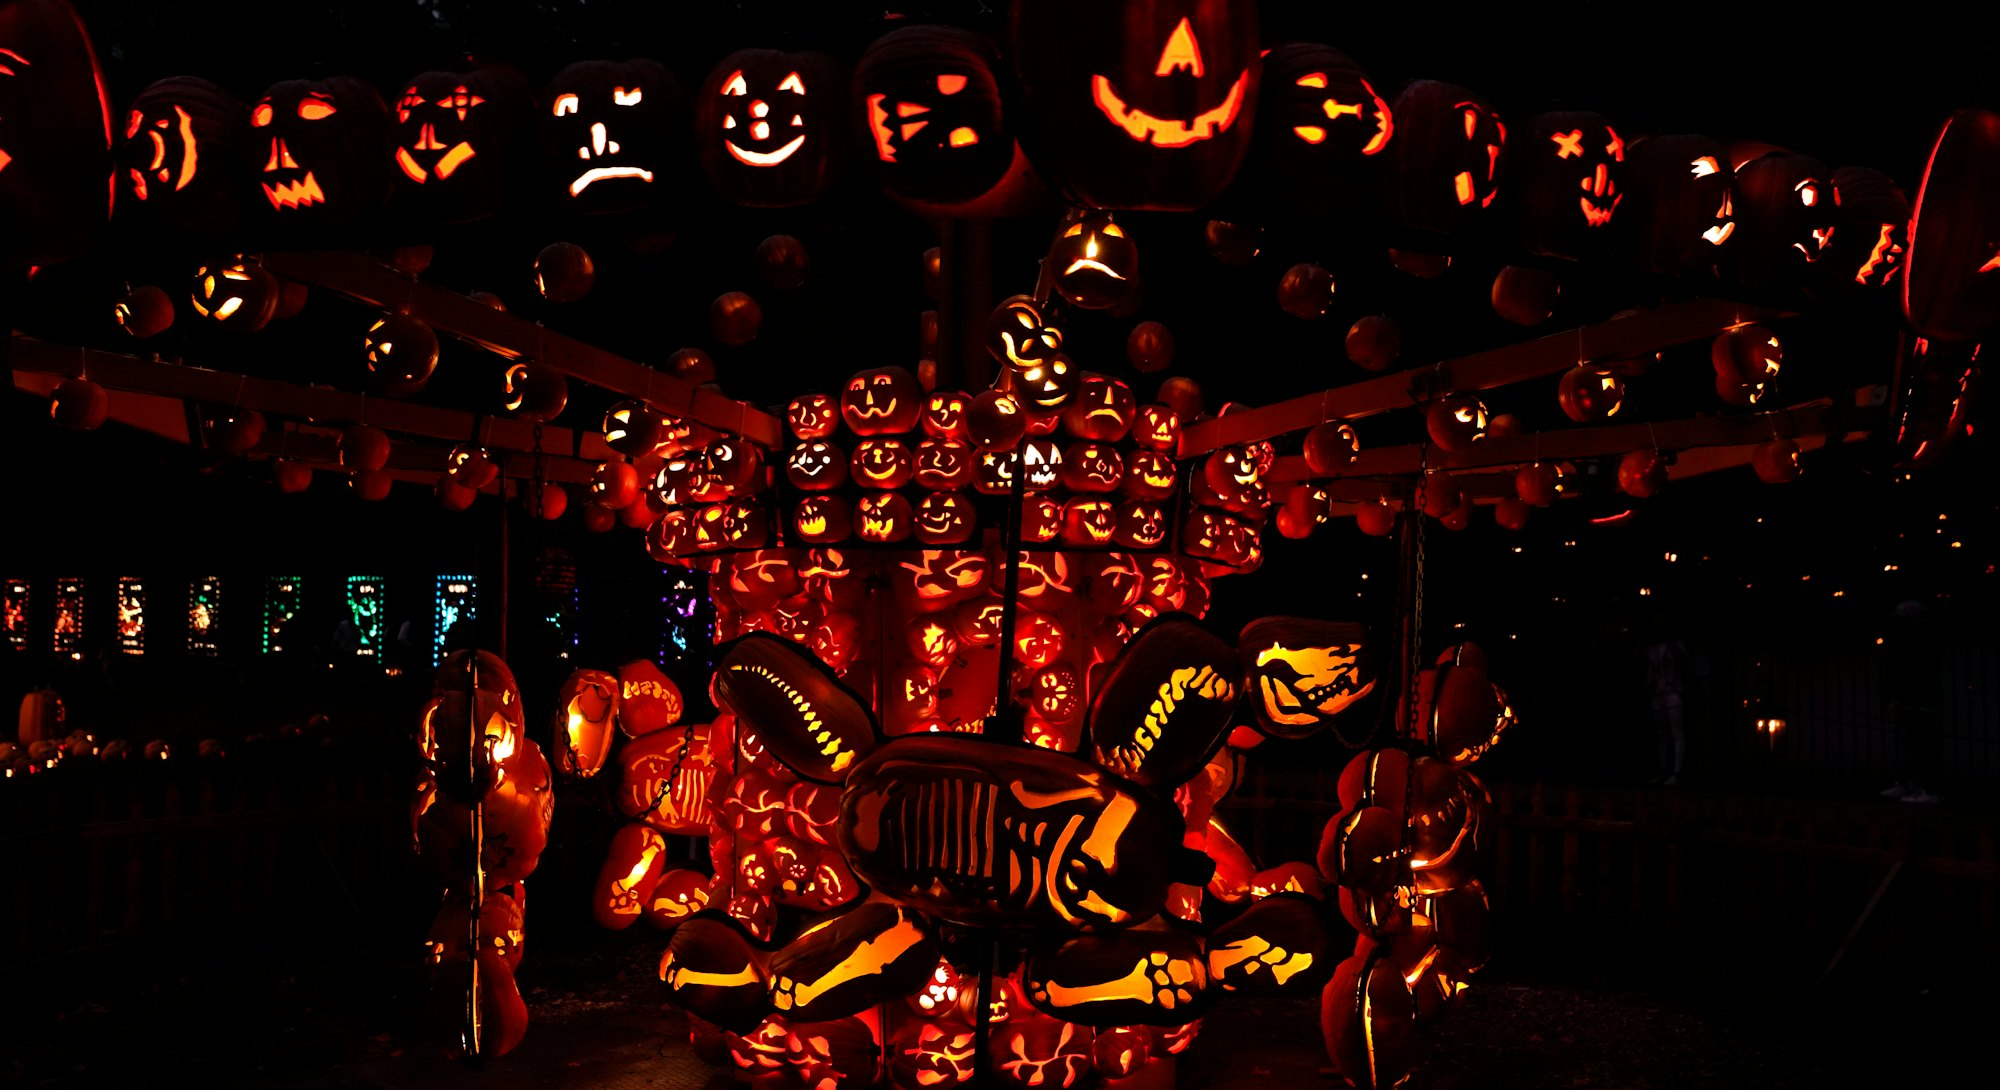 Halloween decorations are seen on display during the Great Jack OLantern Blaze in Croton-on-Hudson, ...